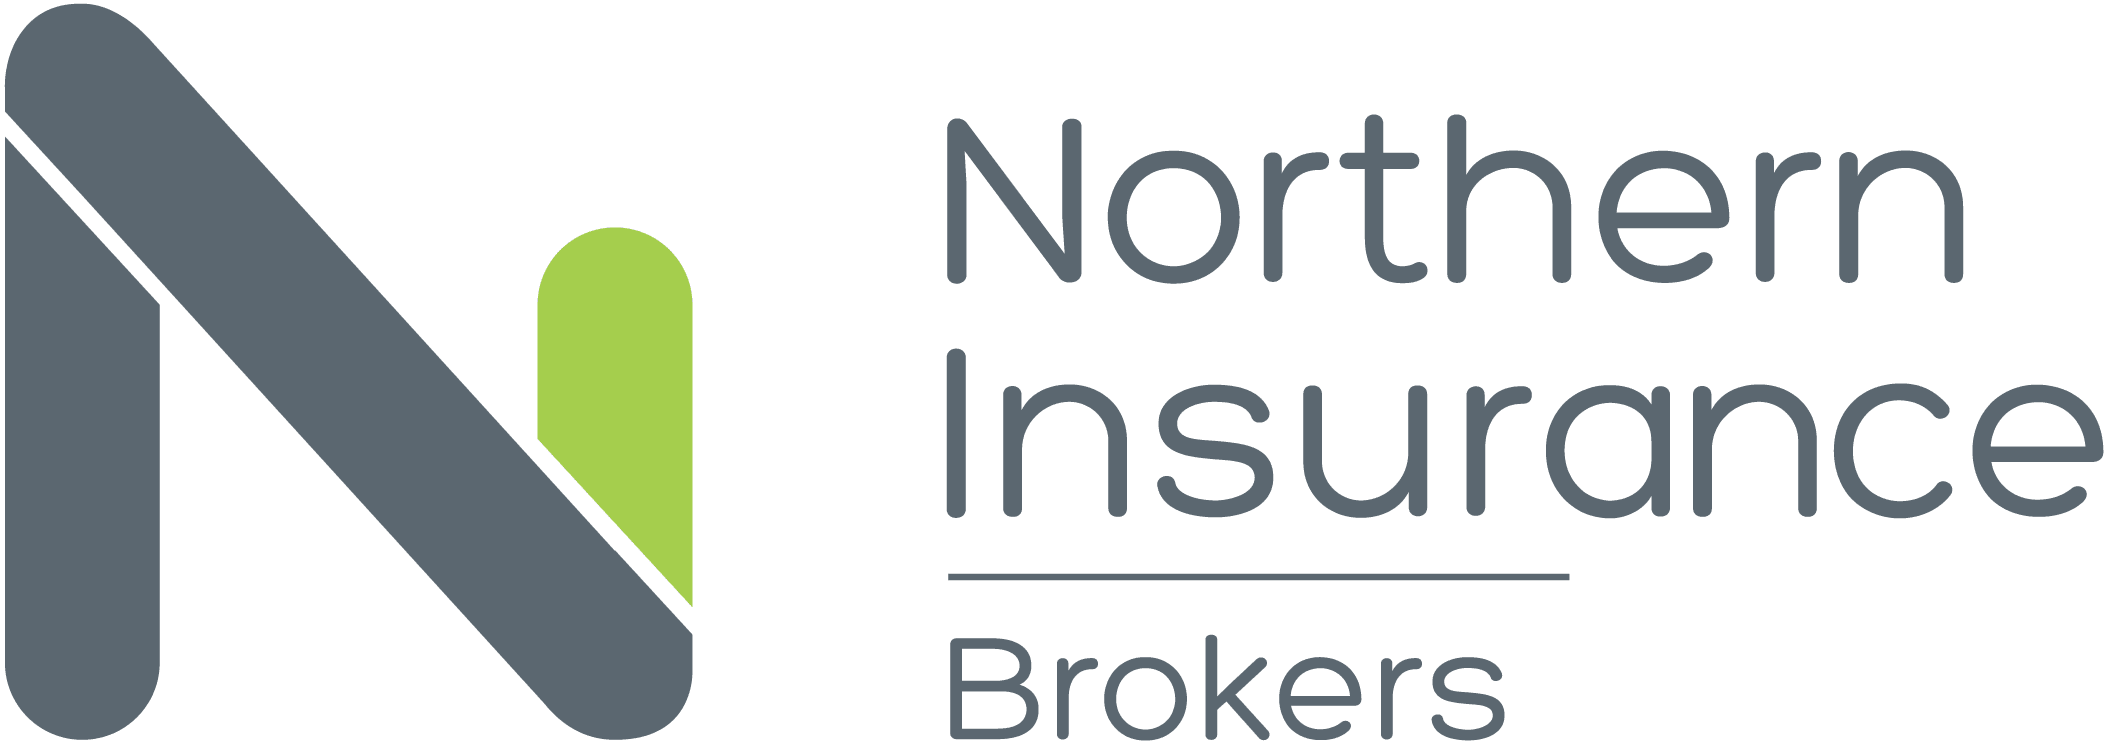 Northern Insurance Brokers - Know your Risks. No More Maybes.